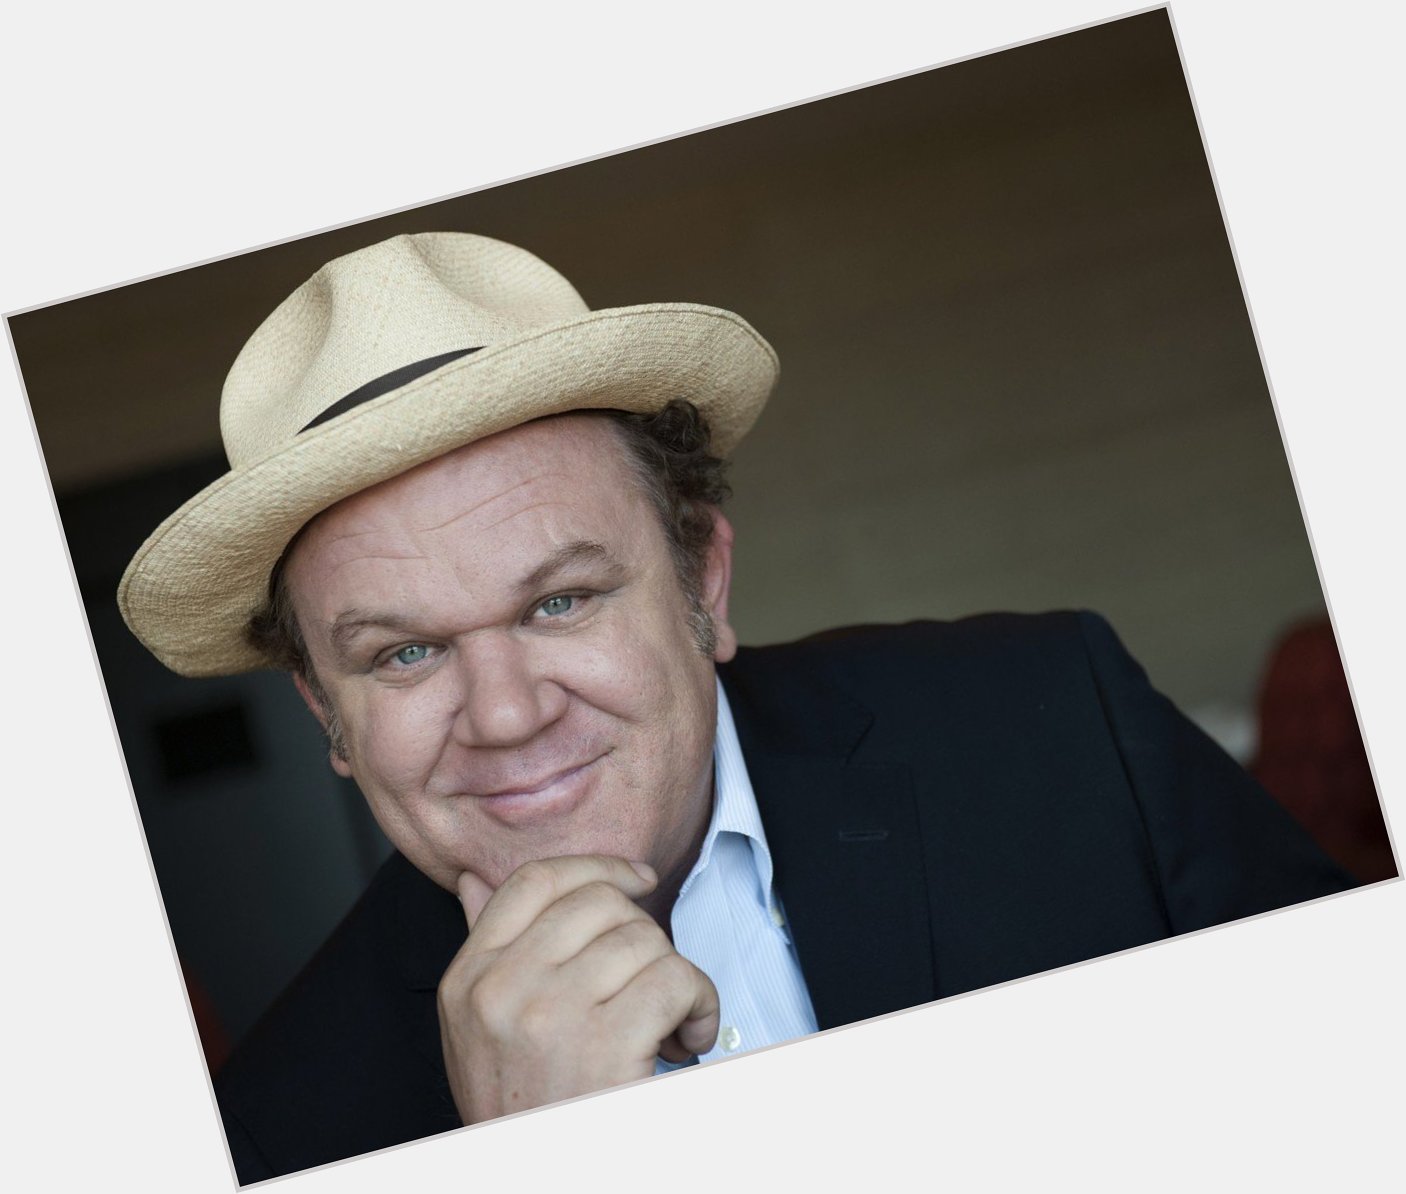 Best wishes and a happy birthday to you, John C. Reilly! 